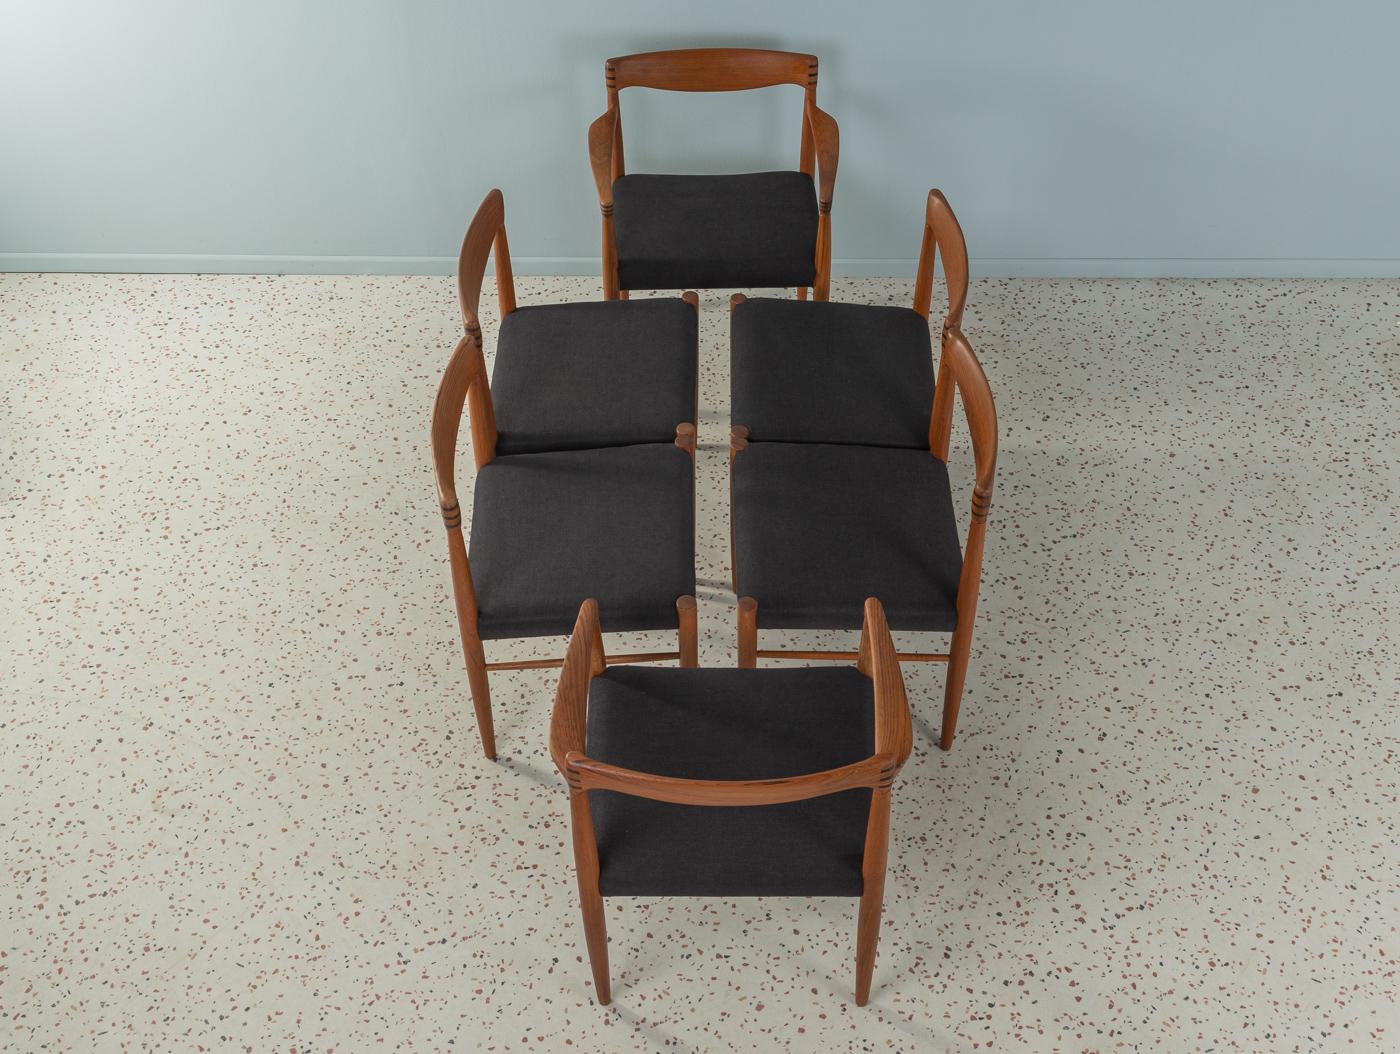 Classic chairs from the 1960s by H.W. Klein for Bramin. Solid teak frame with mortise & tenon backrest and mortise & tenon armrests. The chairs have been reupholstered and covered with a high-quality fabric in black. The offer includes 6 chairs.